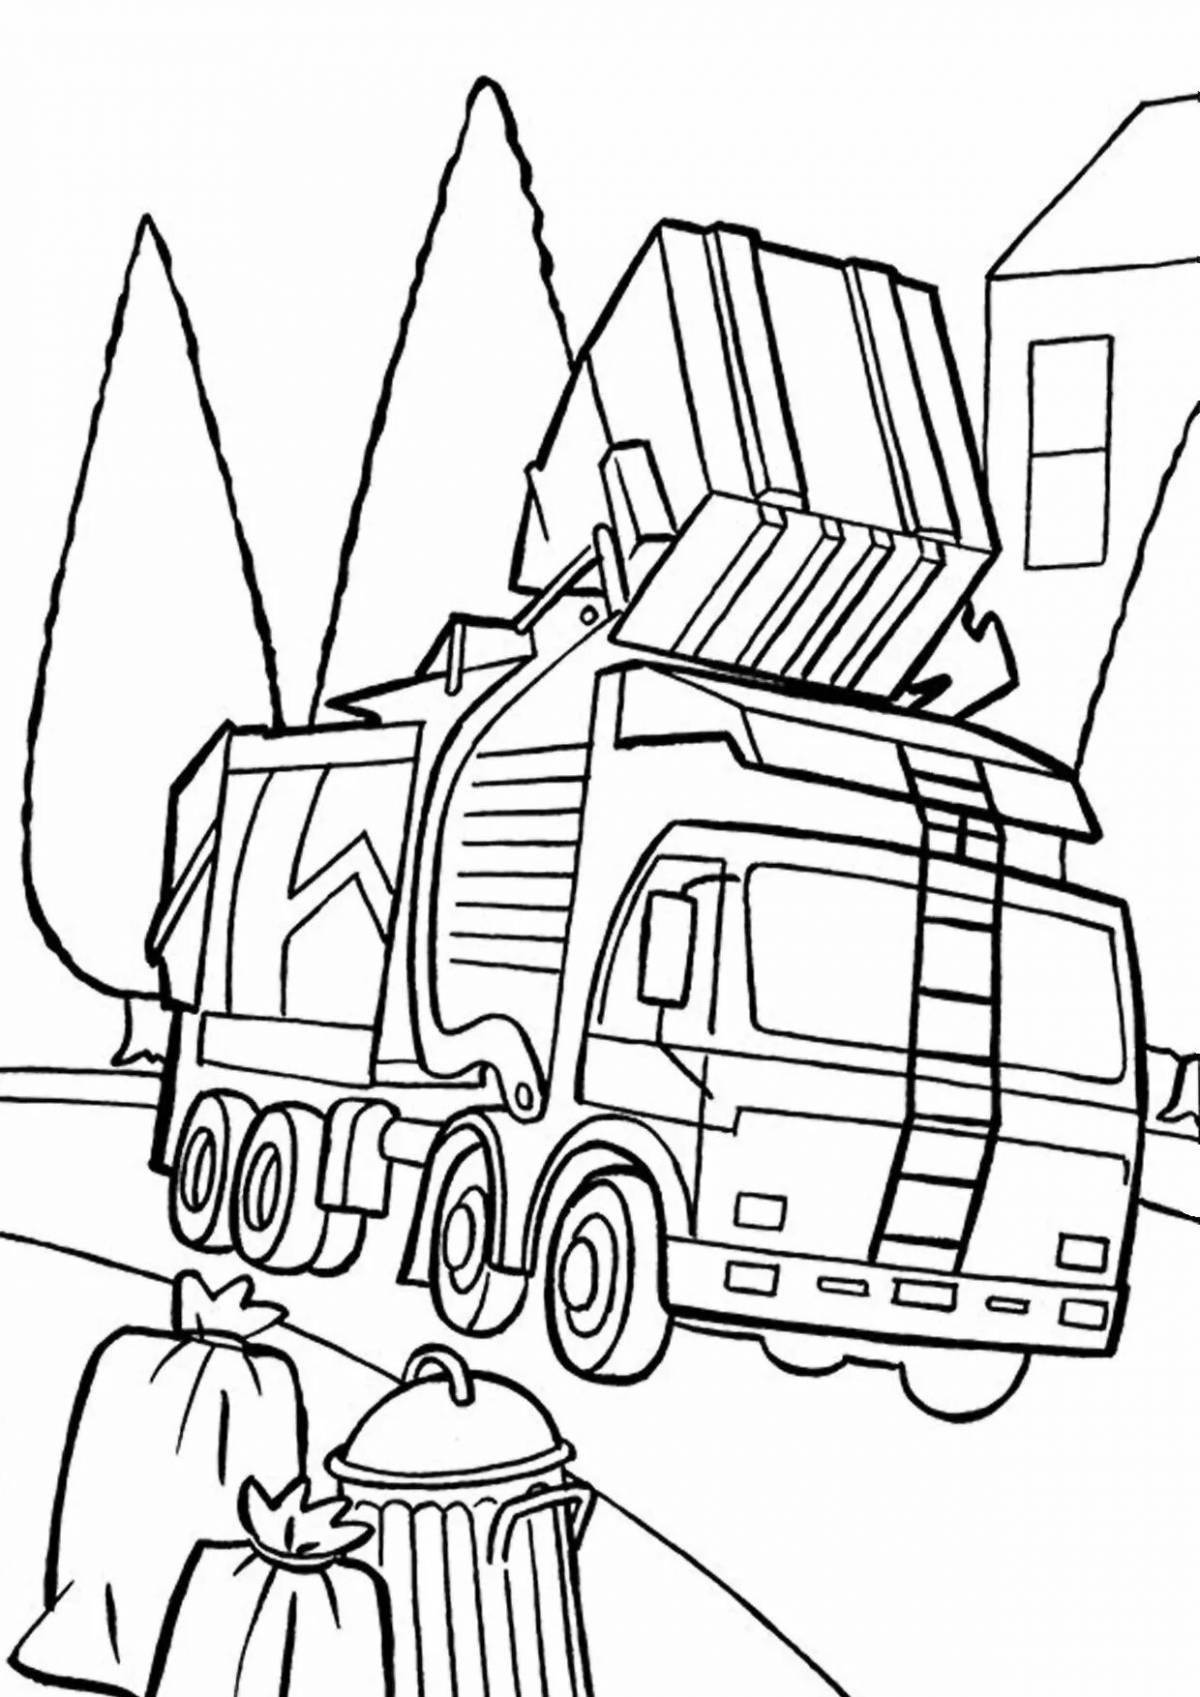 Fantastic garbage truck coloring book for 4-5 year olds